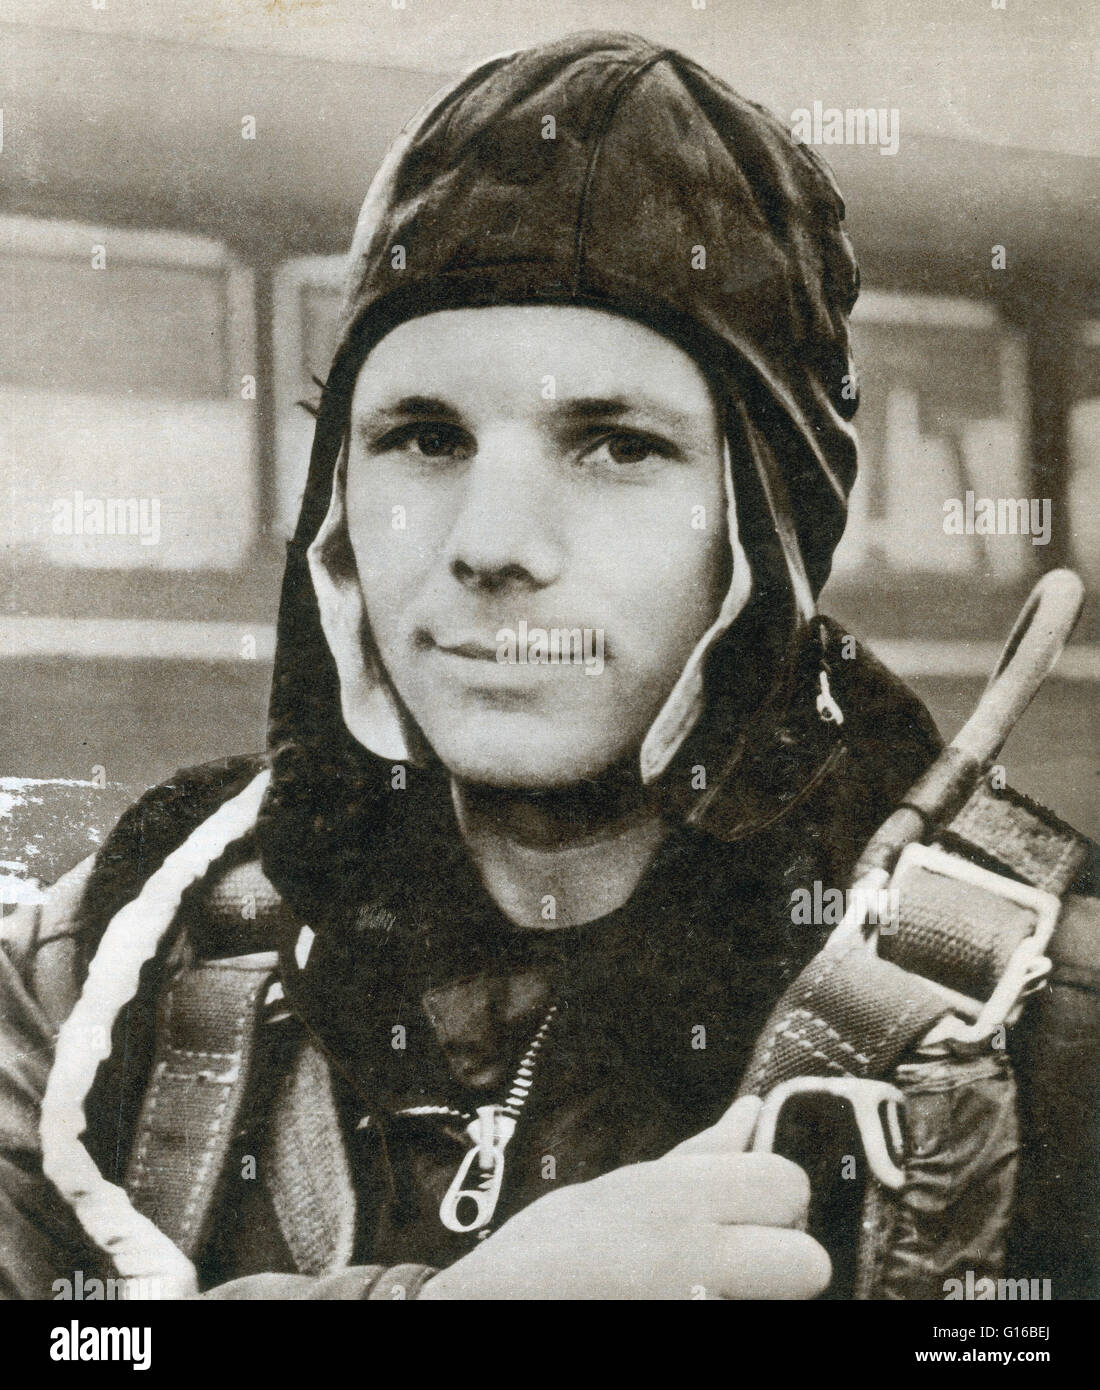 Yuri Alekseyevich Gagarin (March 9, 1934 - March 27, 1968) was a Soviet pilot and cosmonaut. After graduating from a technical school in 1955, he was drafted by the Soviet Army and sent to the First Chkalov Air Force Pilot's School. In 1960, after much se Stock Photo